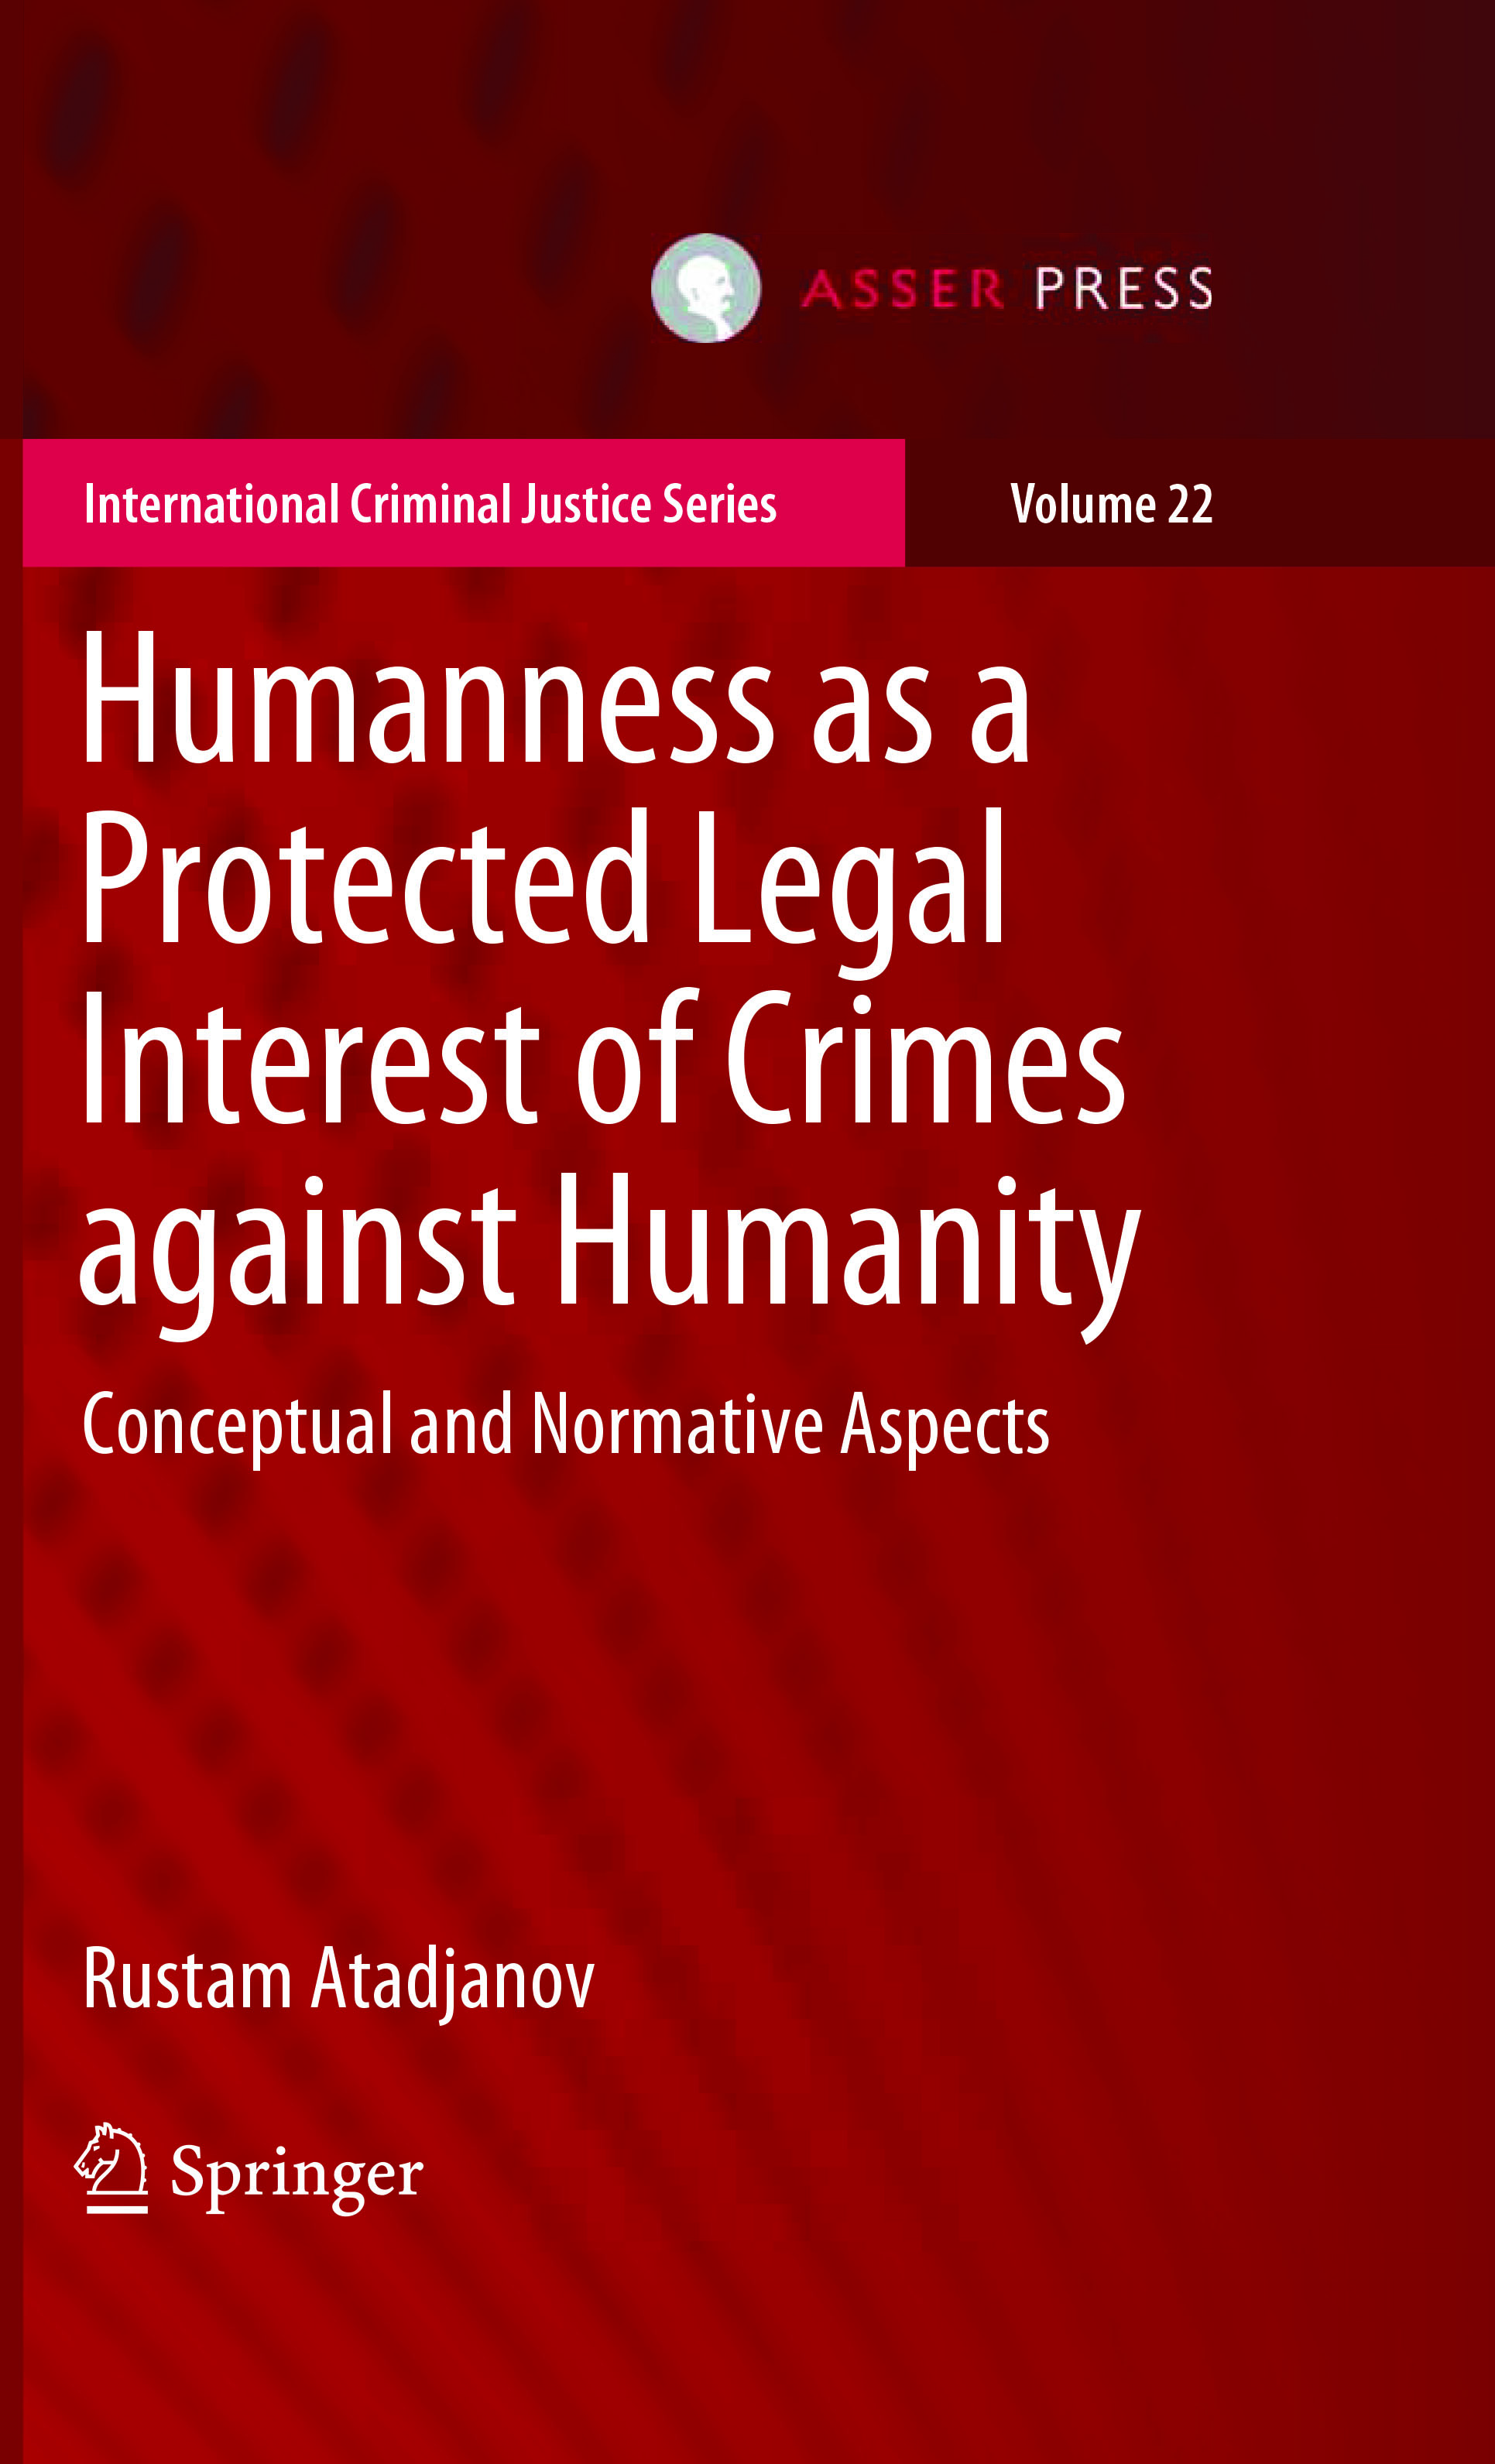 Humanness as a Protected Legal Interest of Crimes against Humanity - Conceptual and Normative Aspects